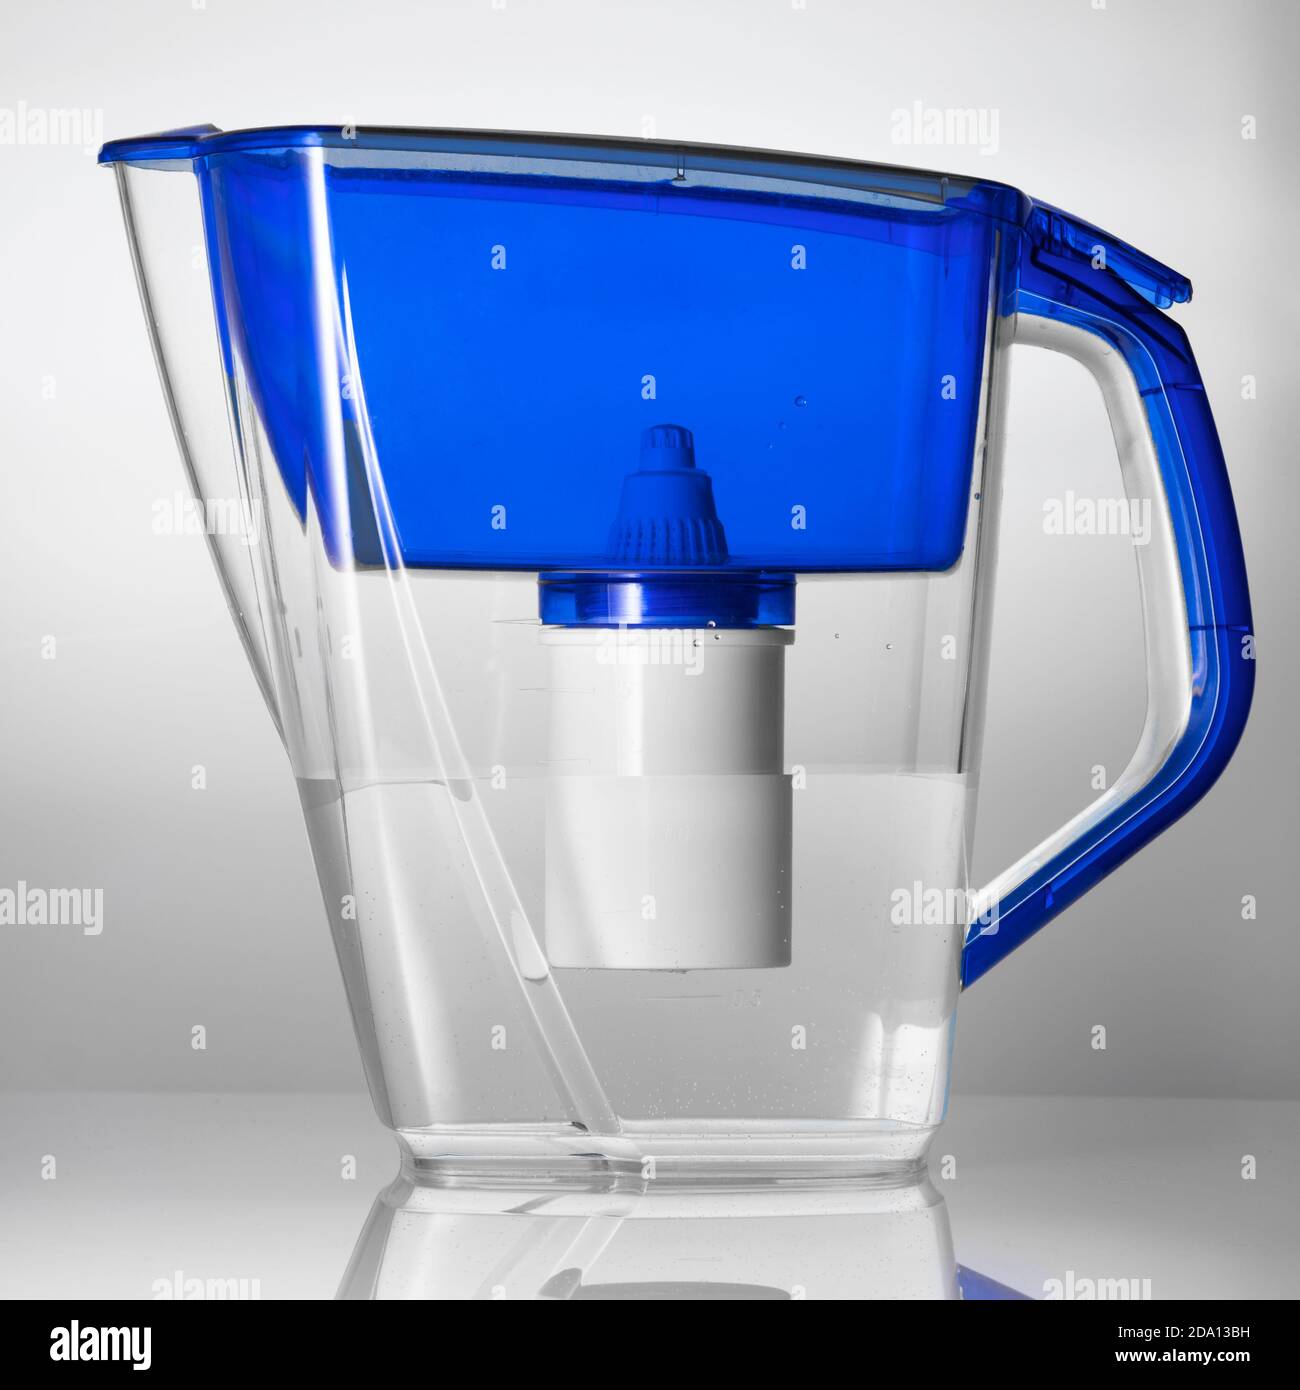 Studio shot of a plastic water filter jug standing on the reflecting surface Stock Photo